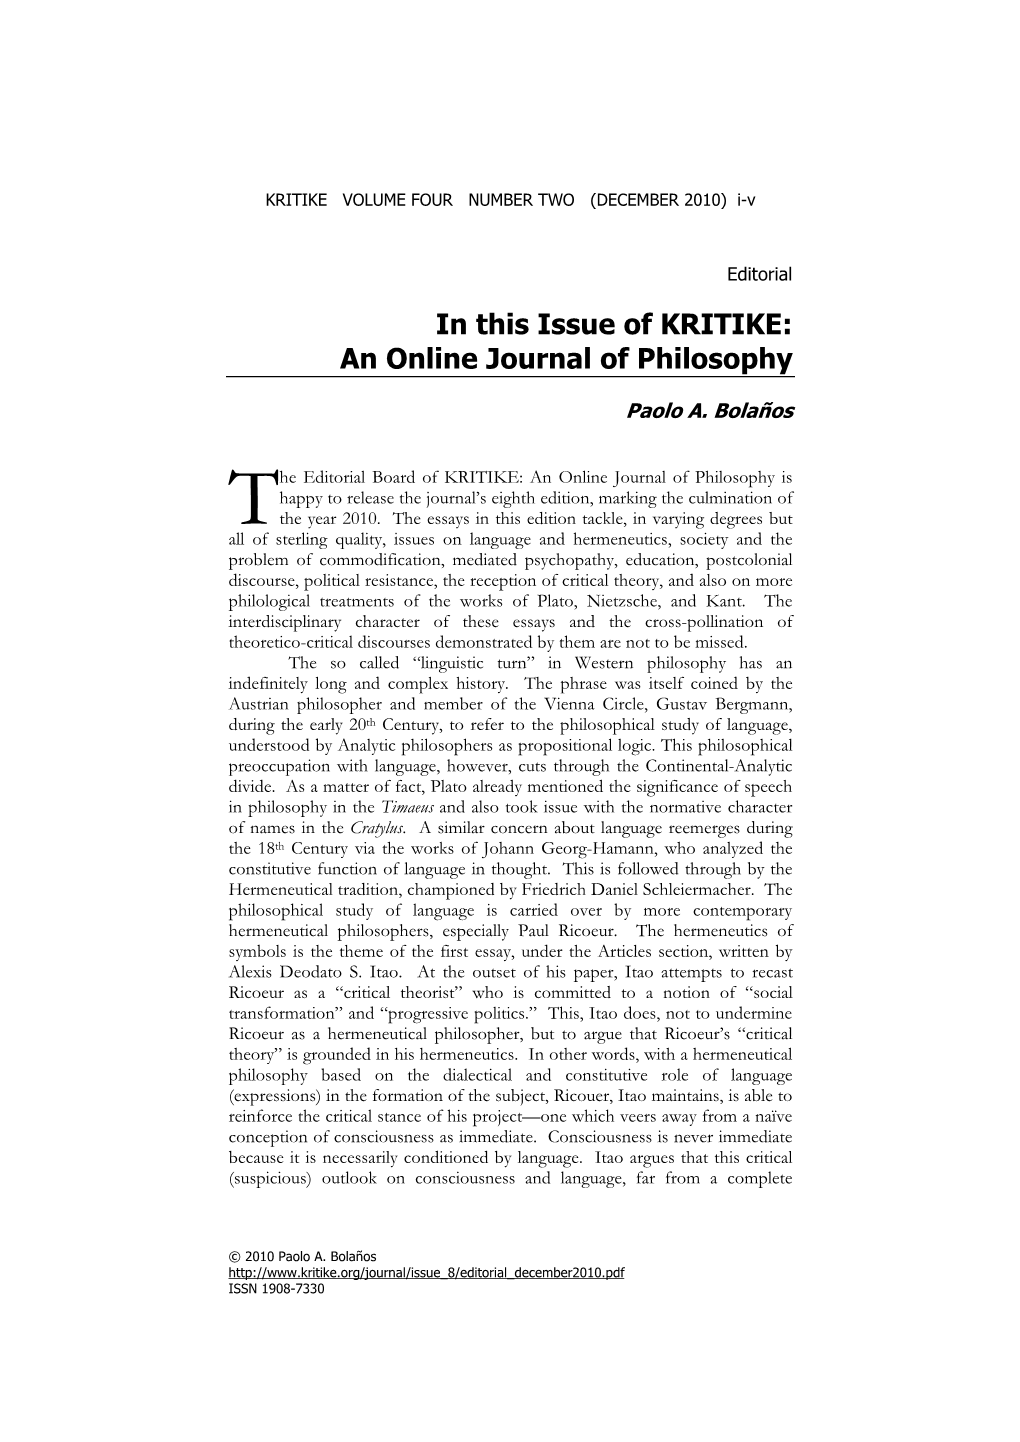 In This Issue of KRITIKE: an Online Journal of Philosophy